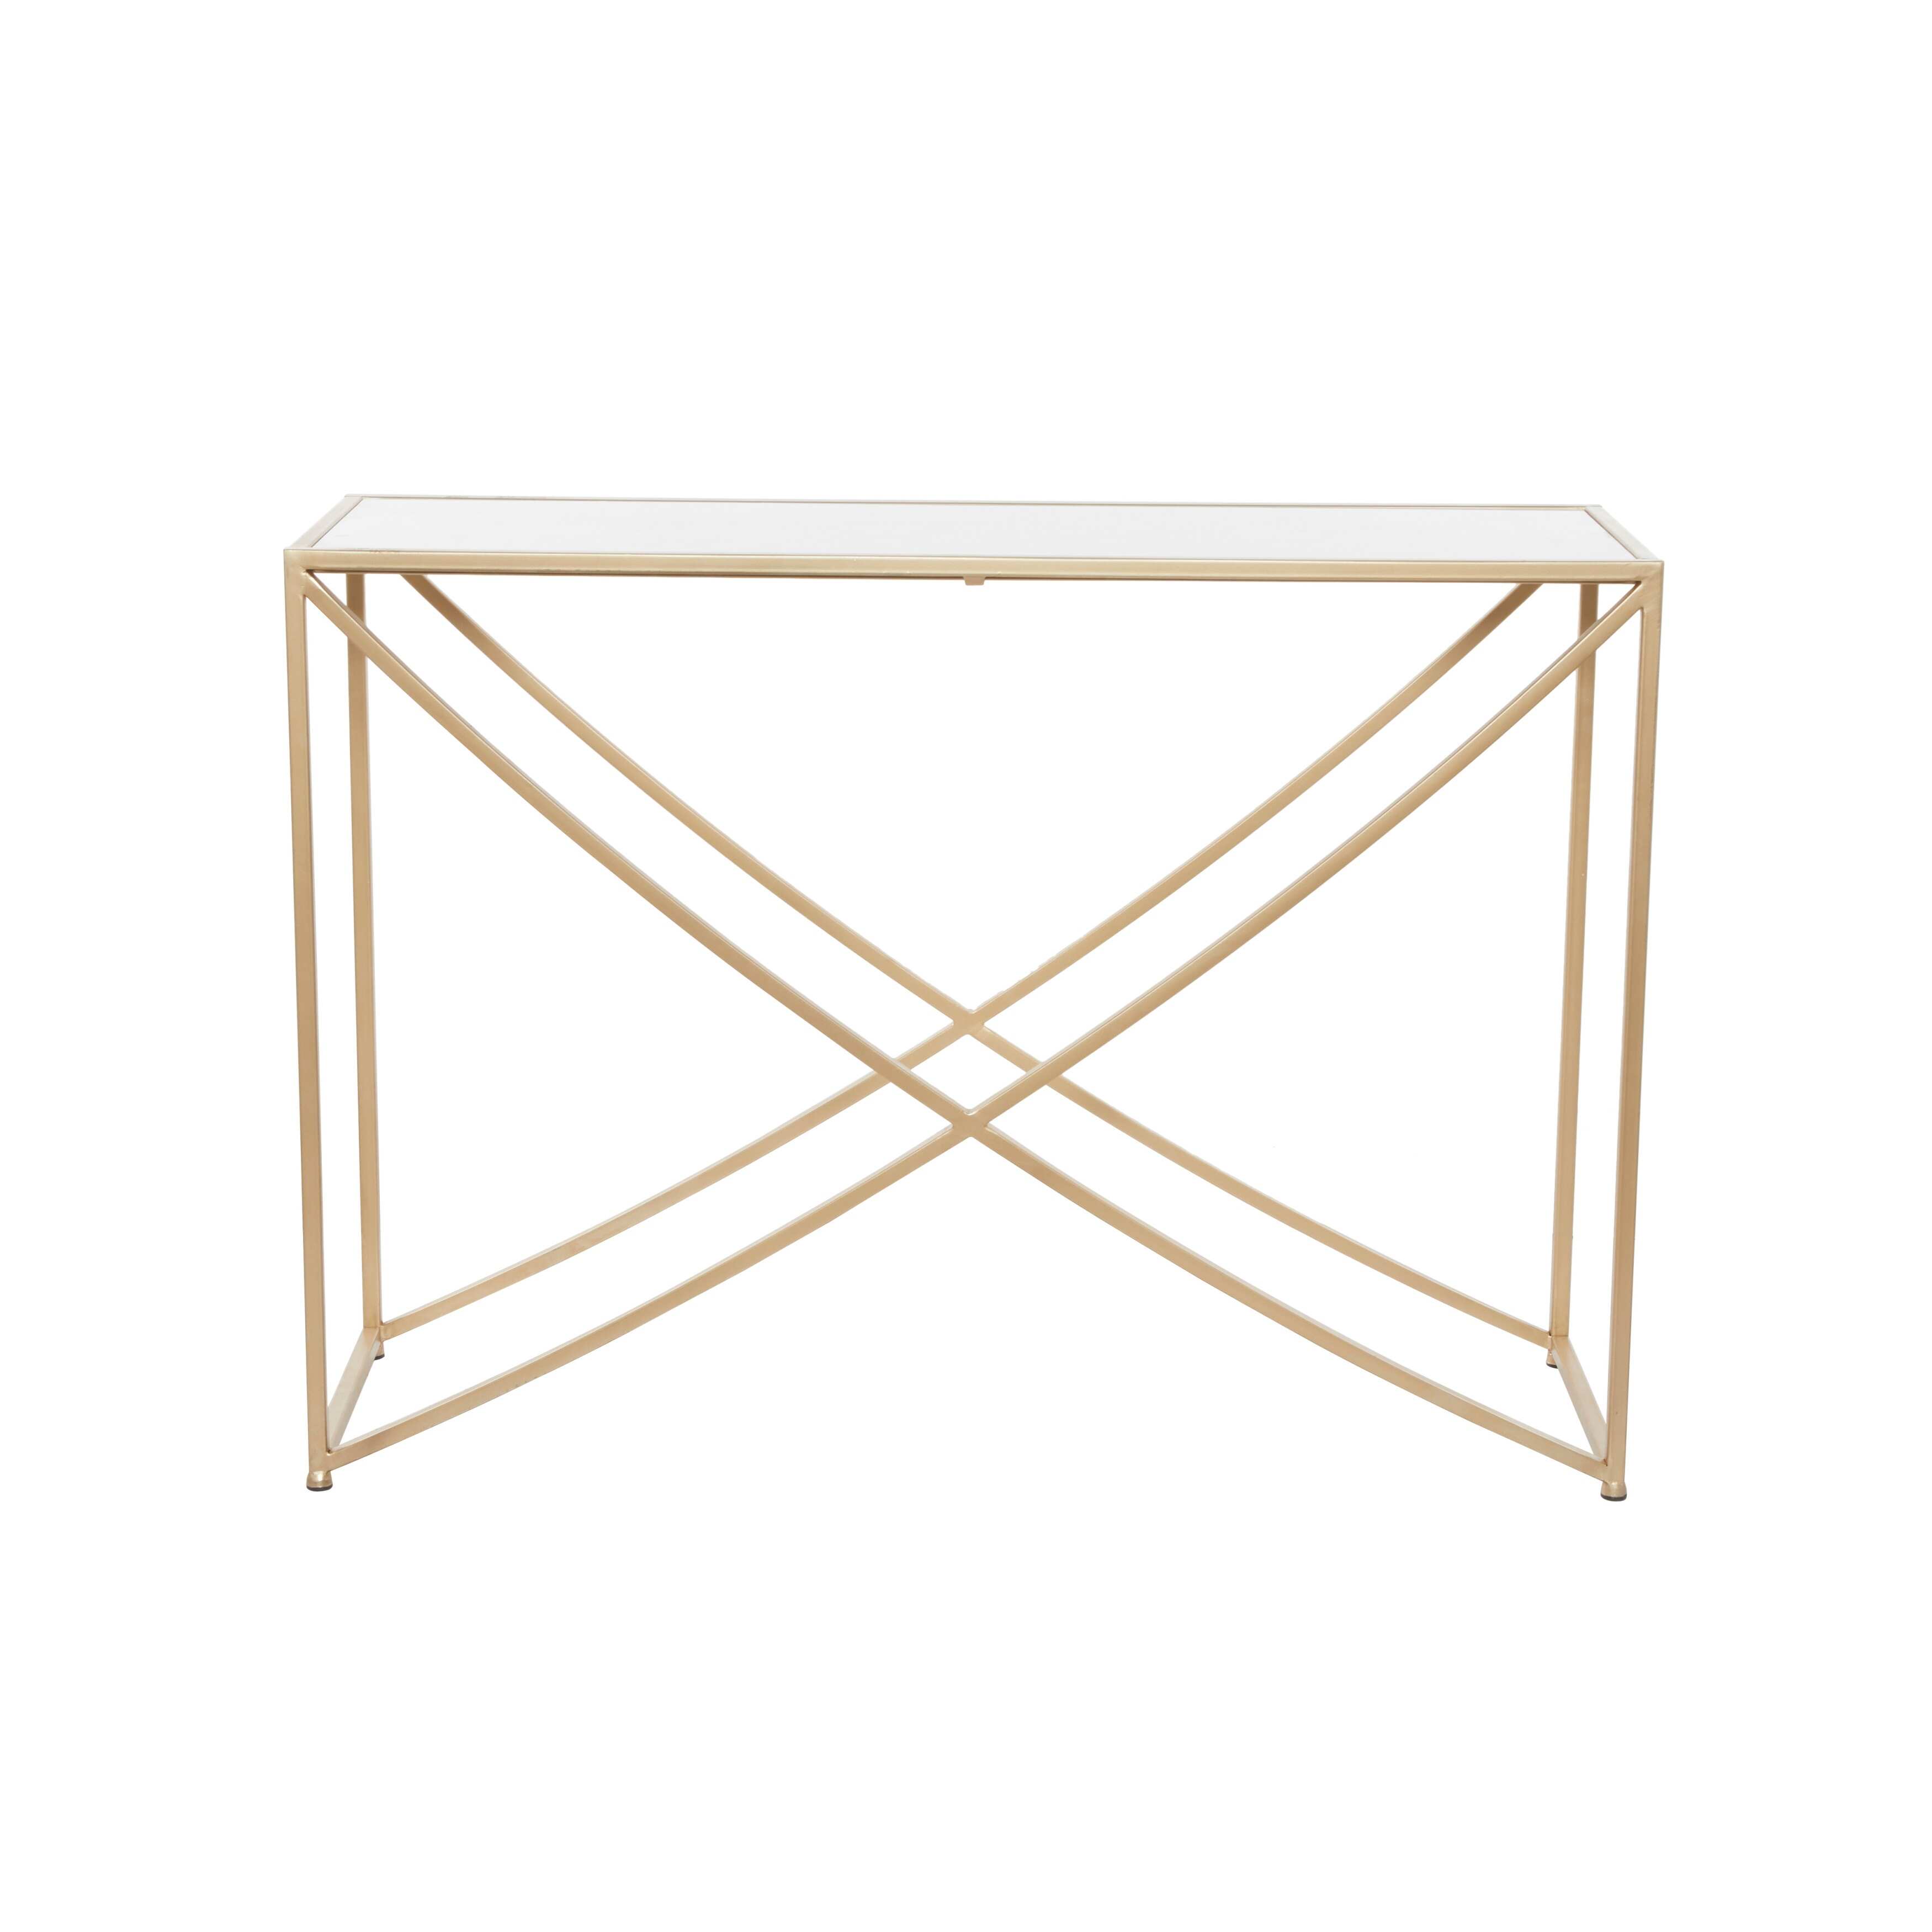 Gold Metal Contemporary Console Table - 42 x 15 x 30